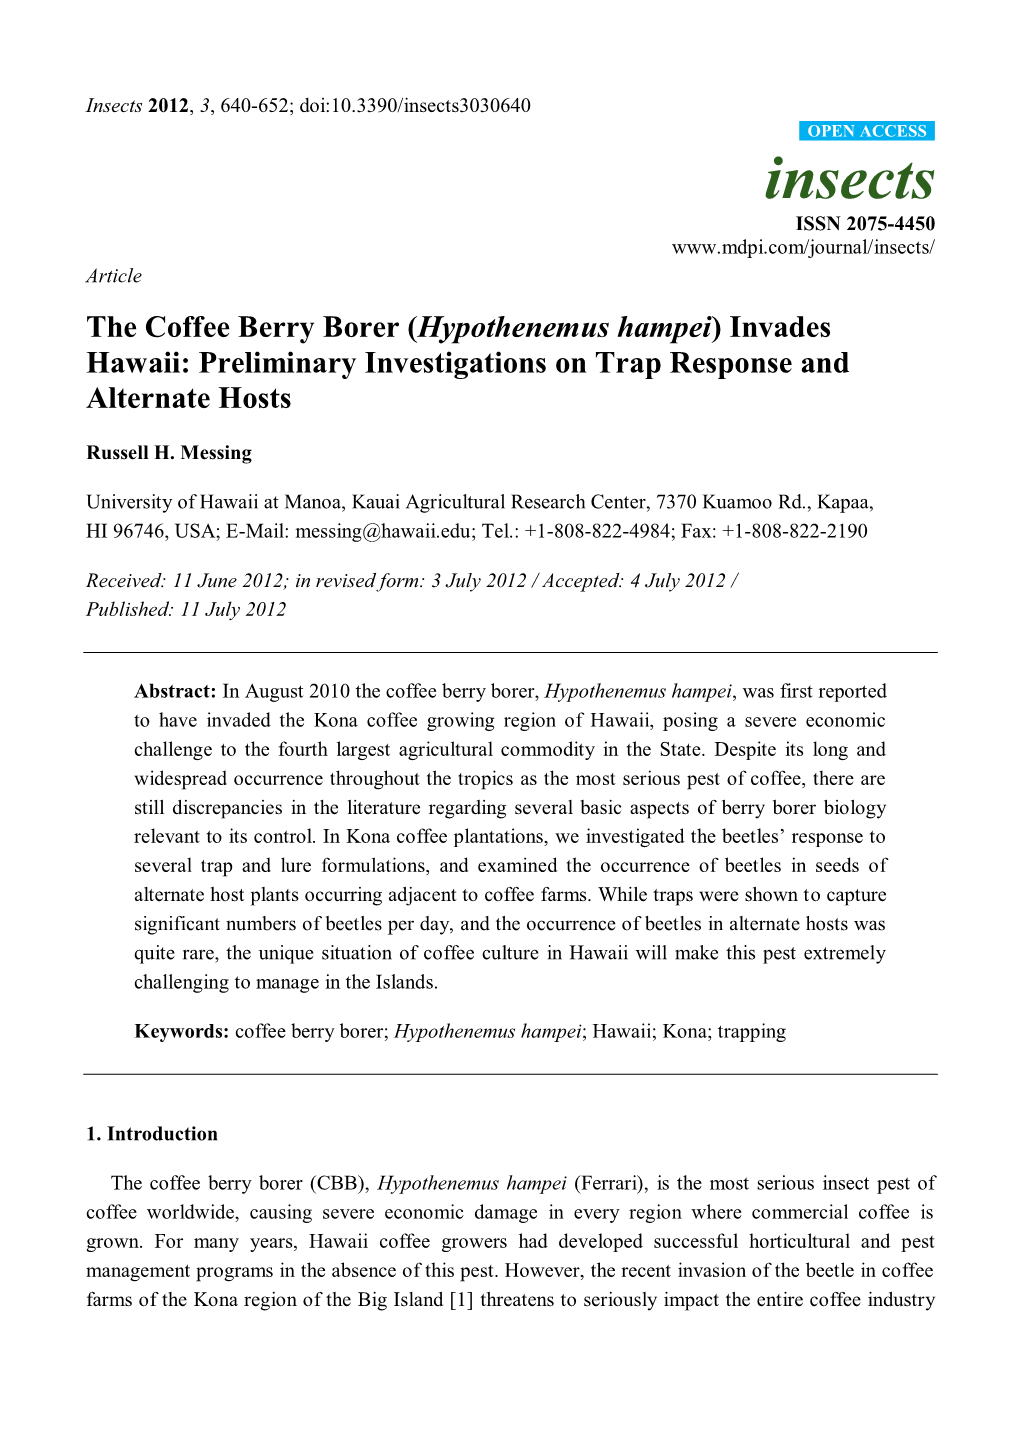 The Coffee Berry Borer (Hypothenemus Hampei) Invades Hawaii: Preliminary Investigations on Trap Response and Alternate Hosts